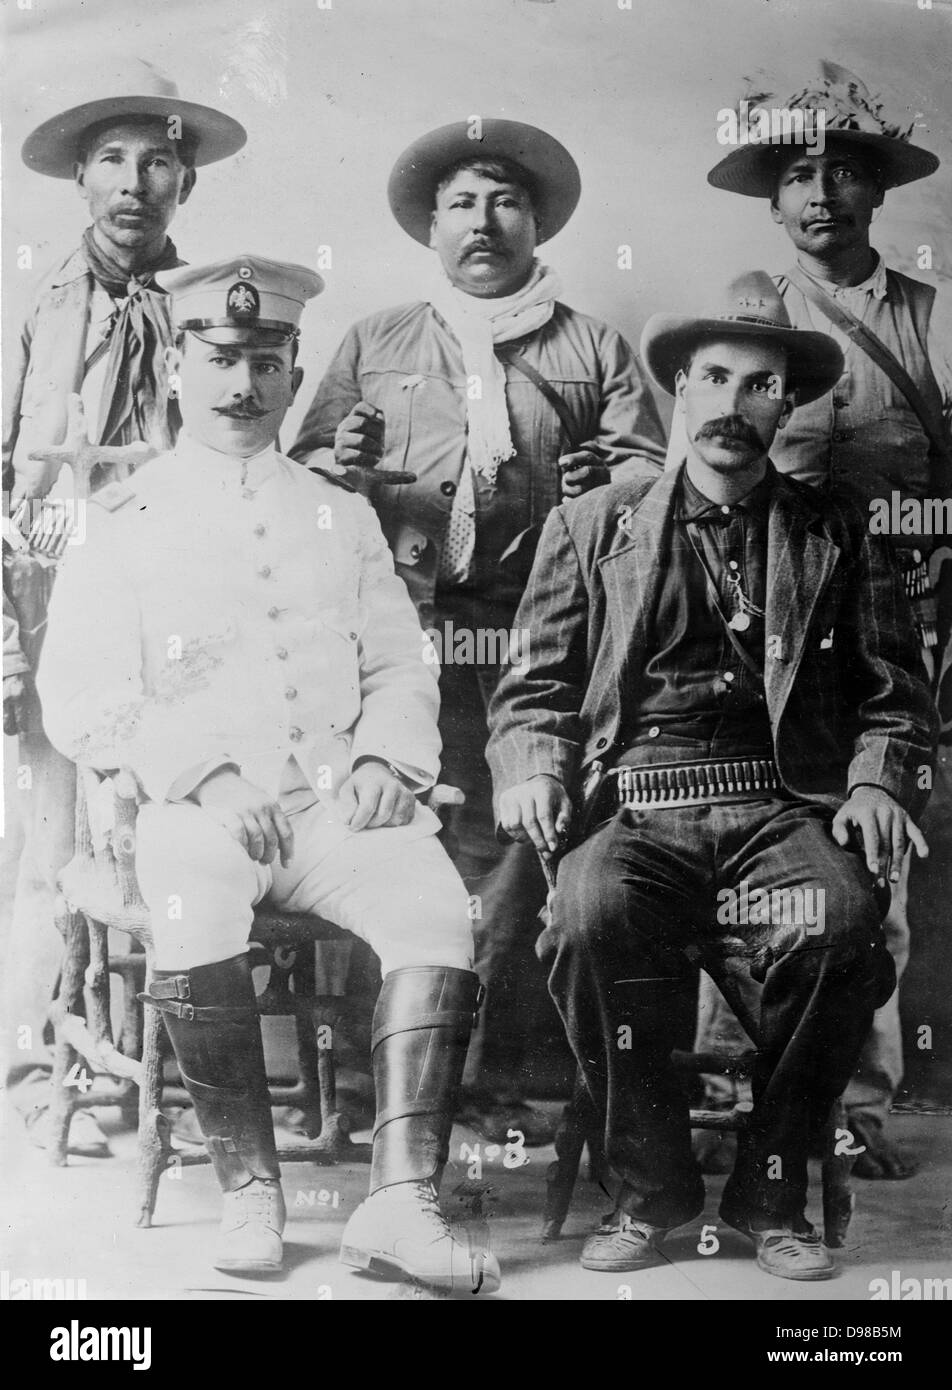 Salvaro Obregon Salido (1880-1928) Mexican general and politician, President of Mexico 1920-1924. Obregon as Commander of the Constitutional Army of the Northwest with his staff of Yaqui troops c1913. Stock Photo